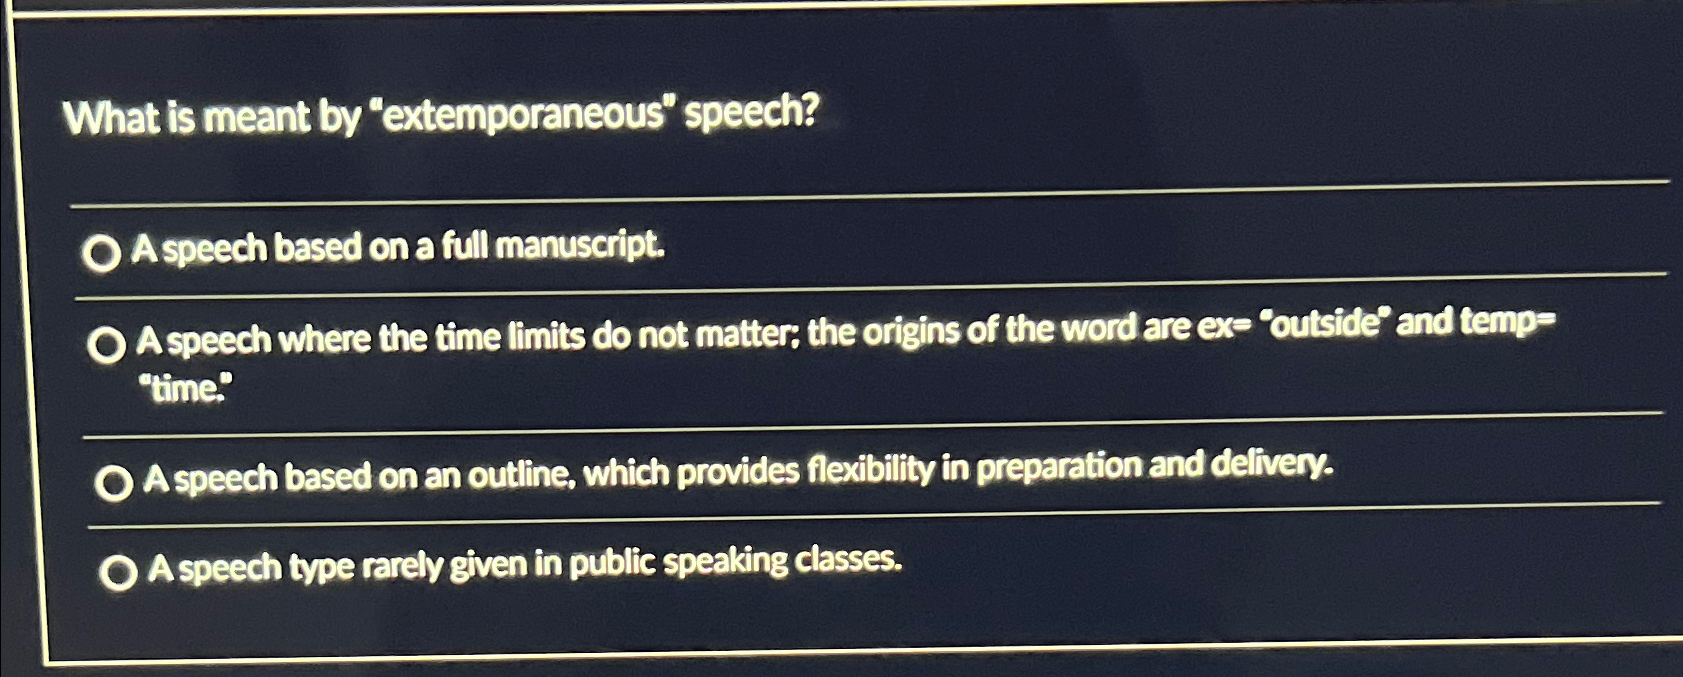 what is meant by extemporaneous speech quizlet